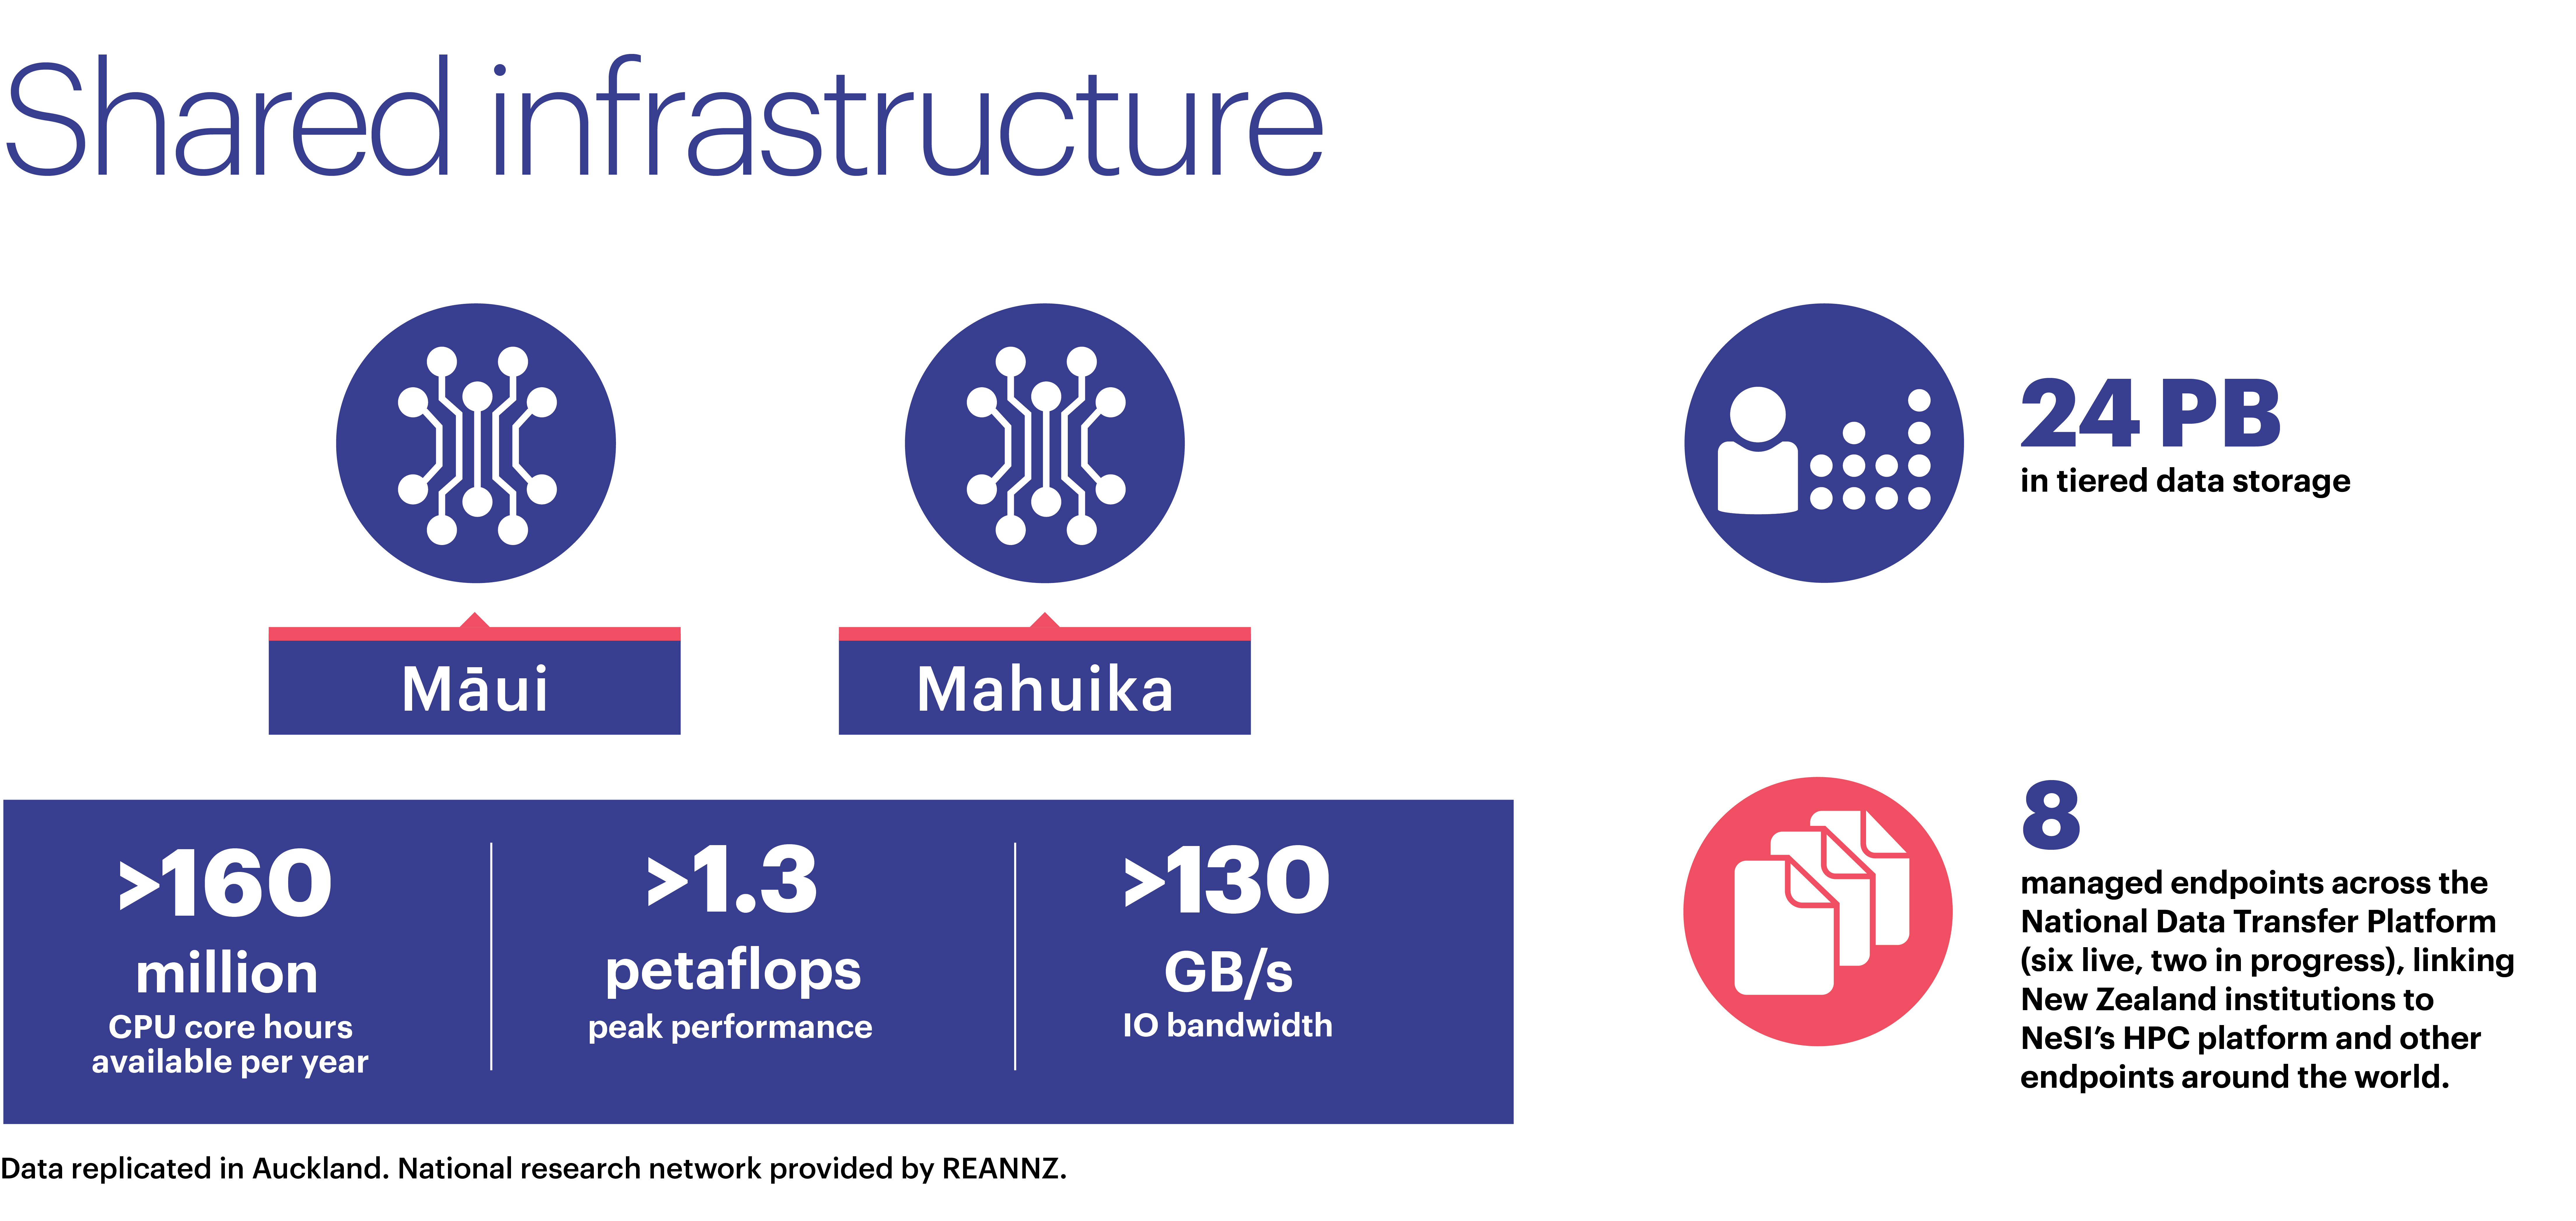 An infographic showing NeSI's shared infrastructure - two HPC platforms (Maui and Mahuika), shared storage, and data transfer capabilities.